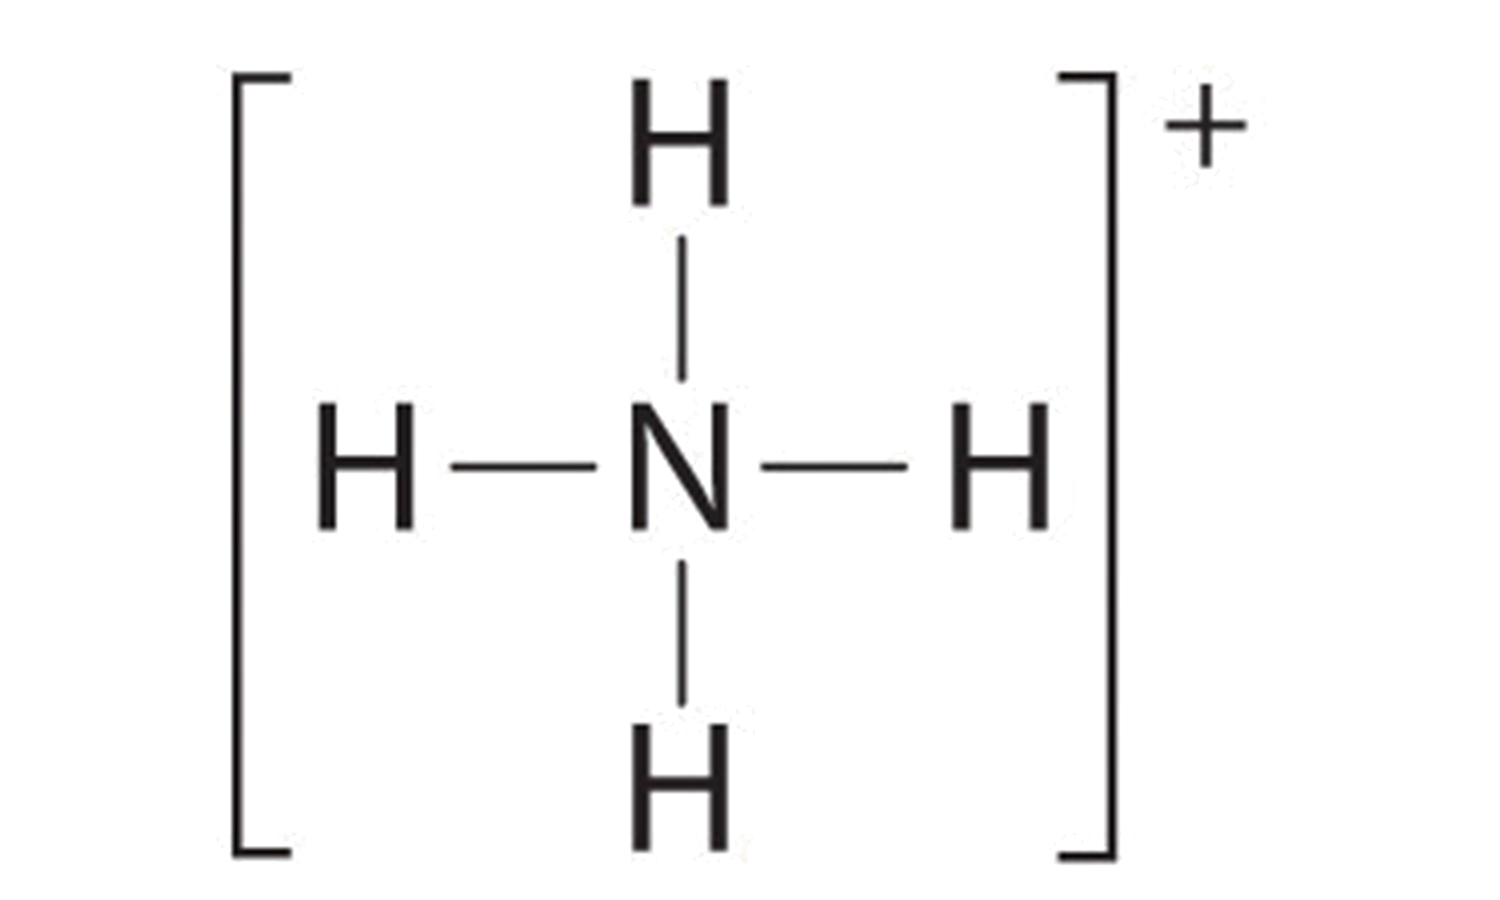 The central nitrogen is bonded to four hydrogens. The molecule is surrounded by square brackets. Outside the bracket is where the positive charge is placed. 